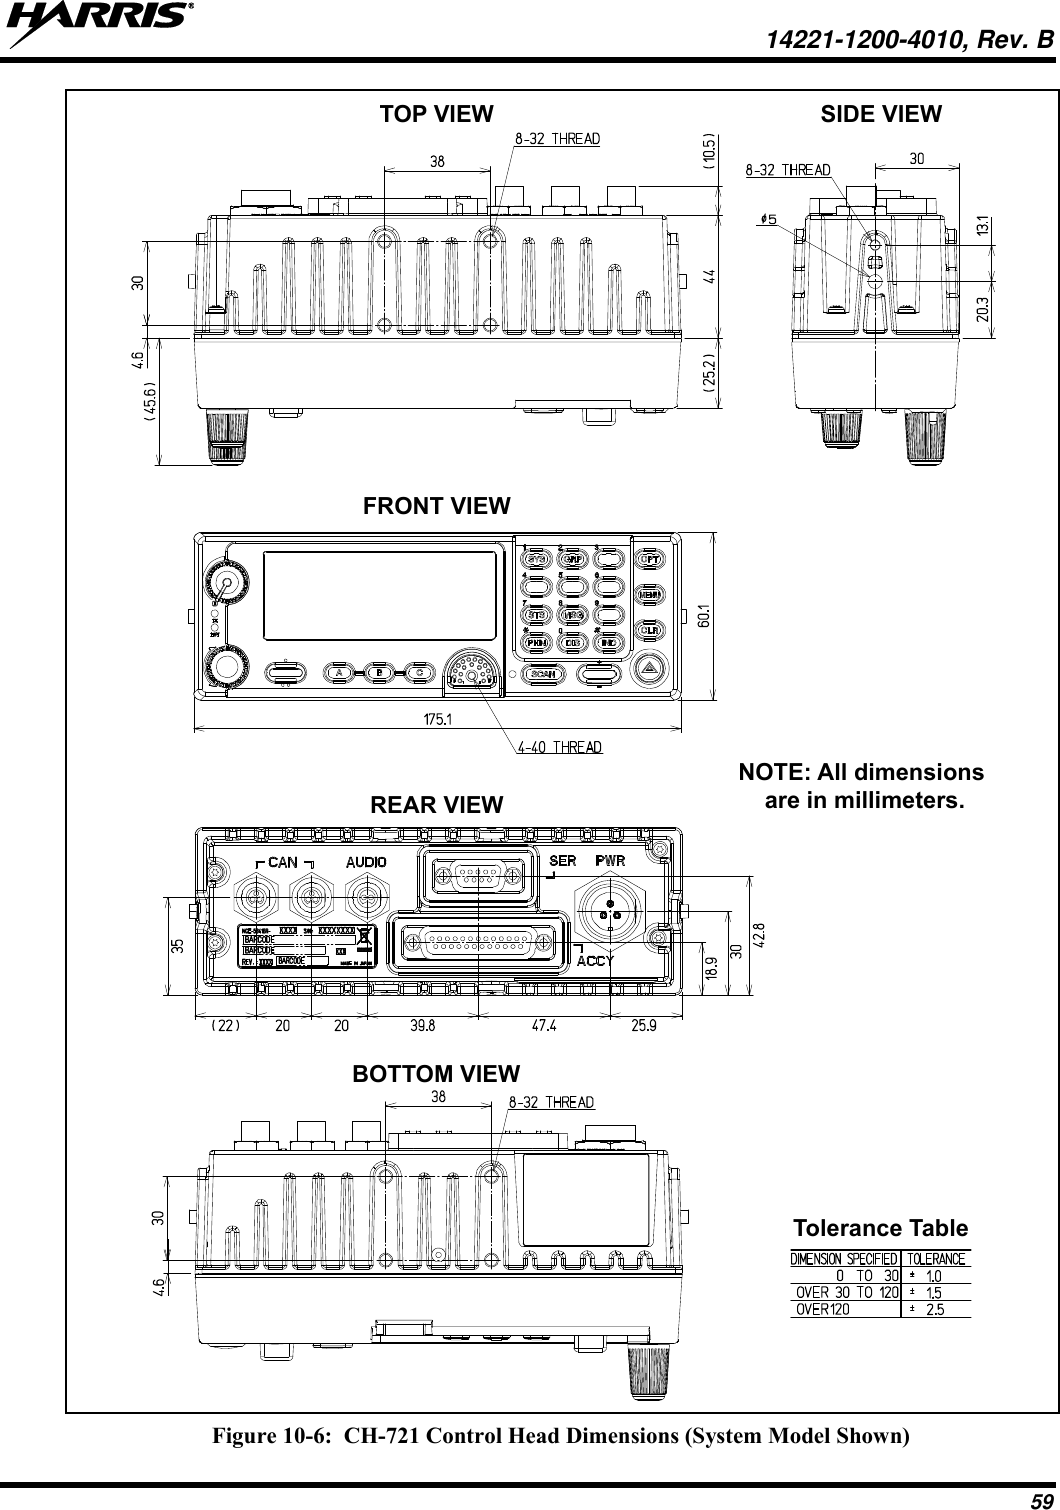   14221-1200-4010, Rev. B 59  Figure 10-6:  CH-721 Control Head Dimensions (System Model Shown) SIDE VIEWTOP VIEWFRONT VIEWNOTE: All dimensionsare in millimeters.Tolerance TableBOTTOM VIEWREAR VIEW